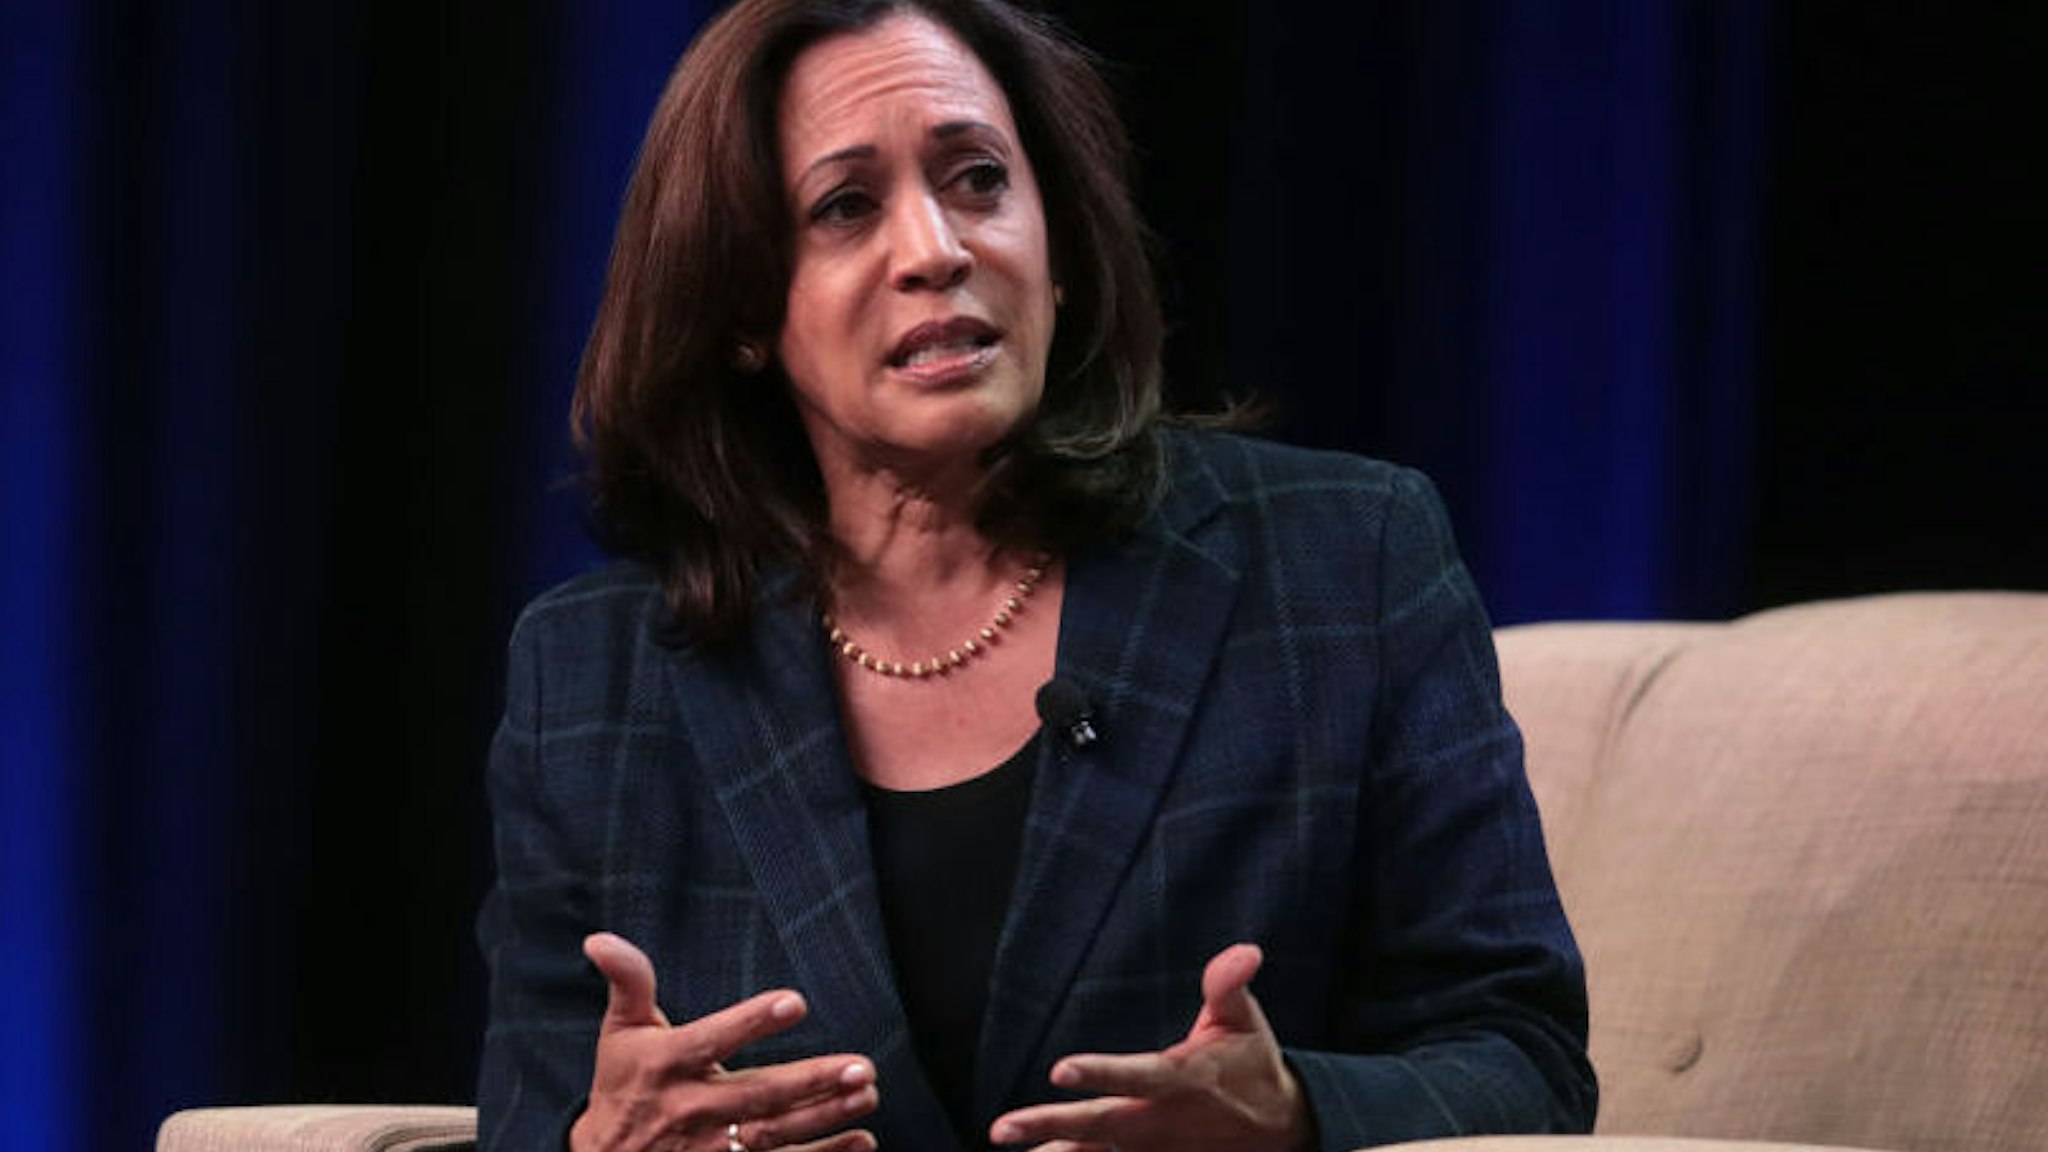 ALTOONA, IOWA - OCTOBER 13: Democratic presidential candidate Sen. Kamala Harris (D-CA) speaks to guests at the United Food and Commercial Workers' (UFCW) 2020 presidential candidate forum on October 13, 2019 in Altoona, Iowa. With 1.3 million members the UFCW is America's largest private sector union. The 2020 Iowa Democratic caucuses will take place on February 3, 2020, making it the first nominating contest in the Democratic Party presidential primaries